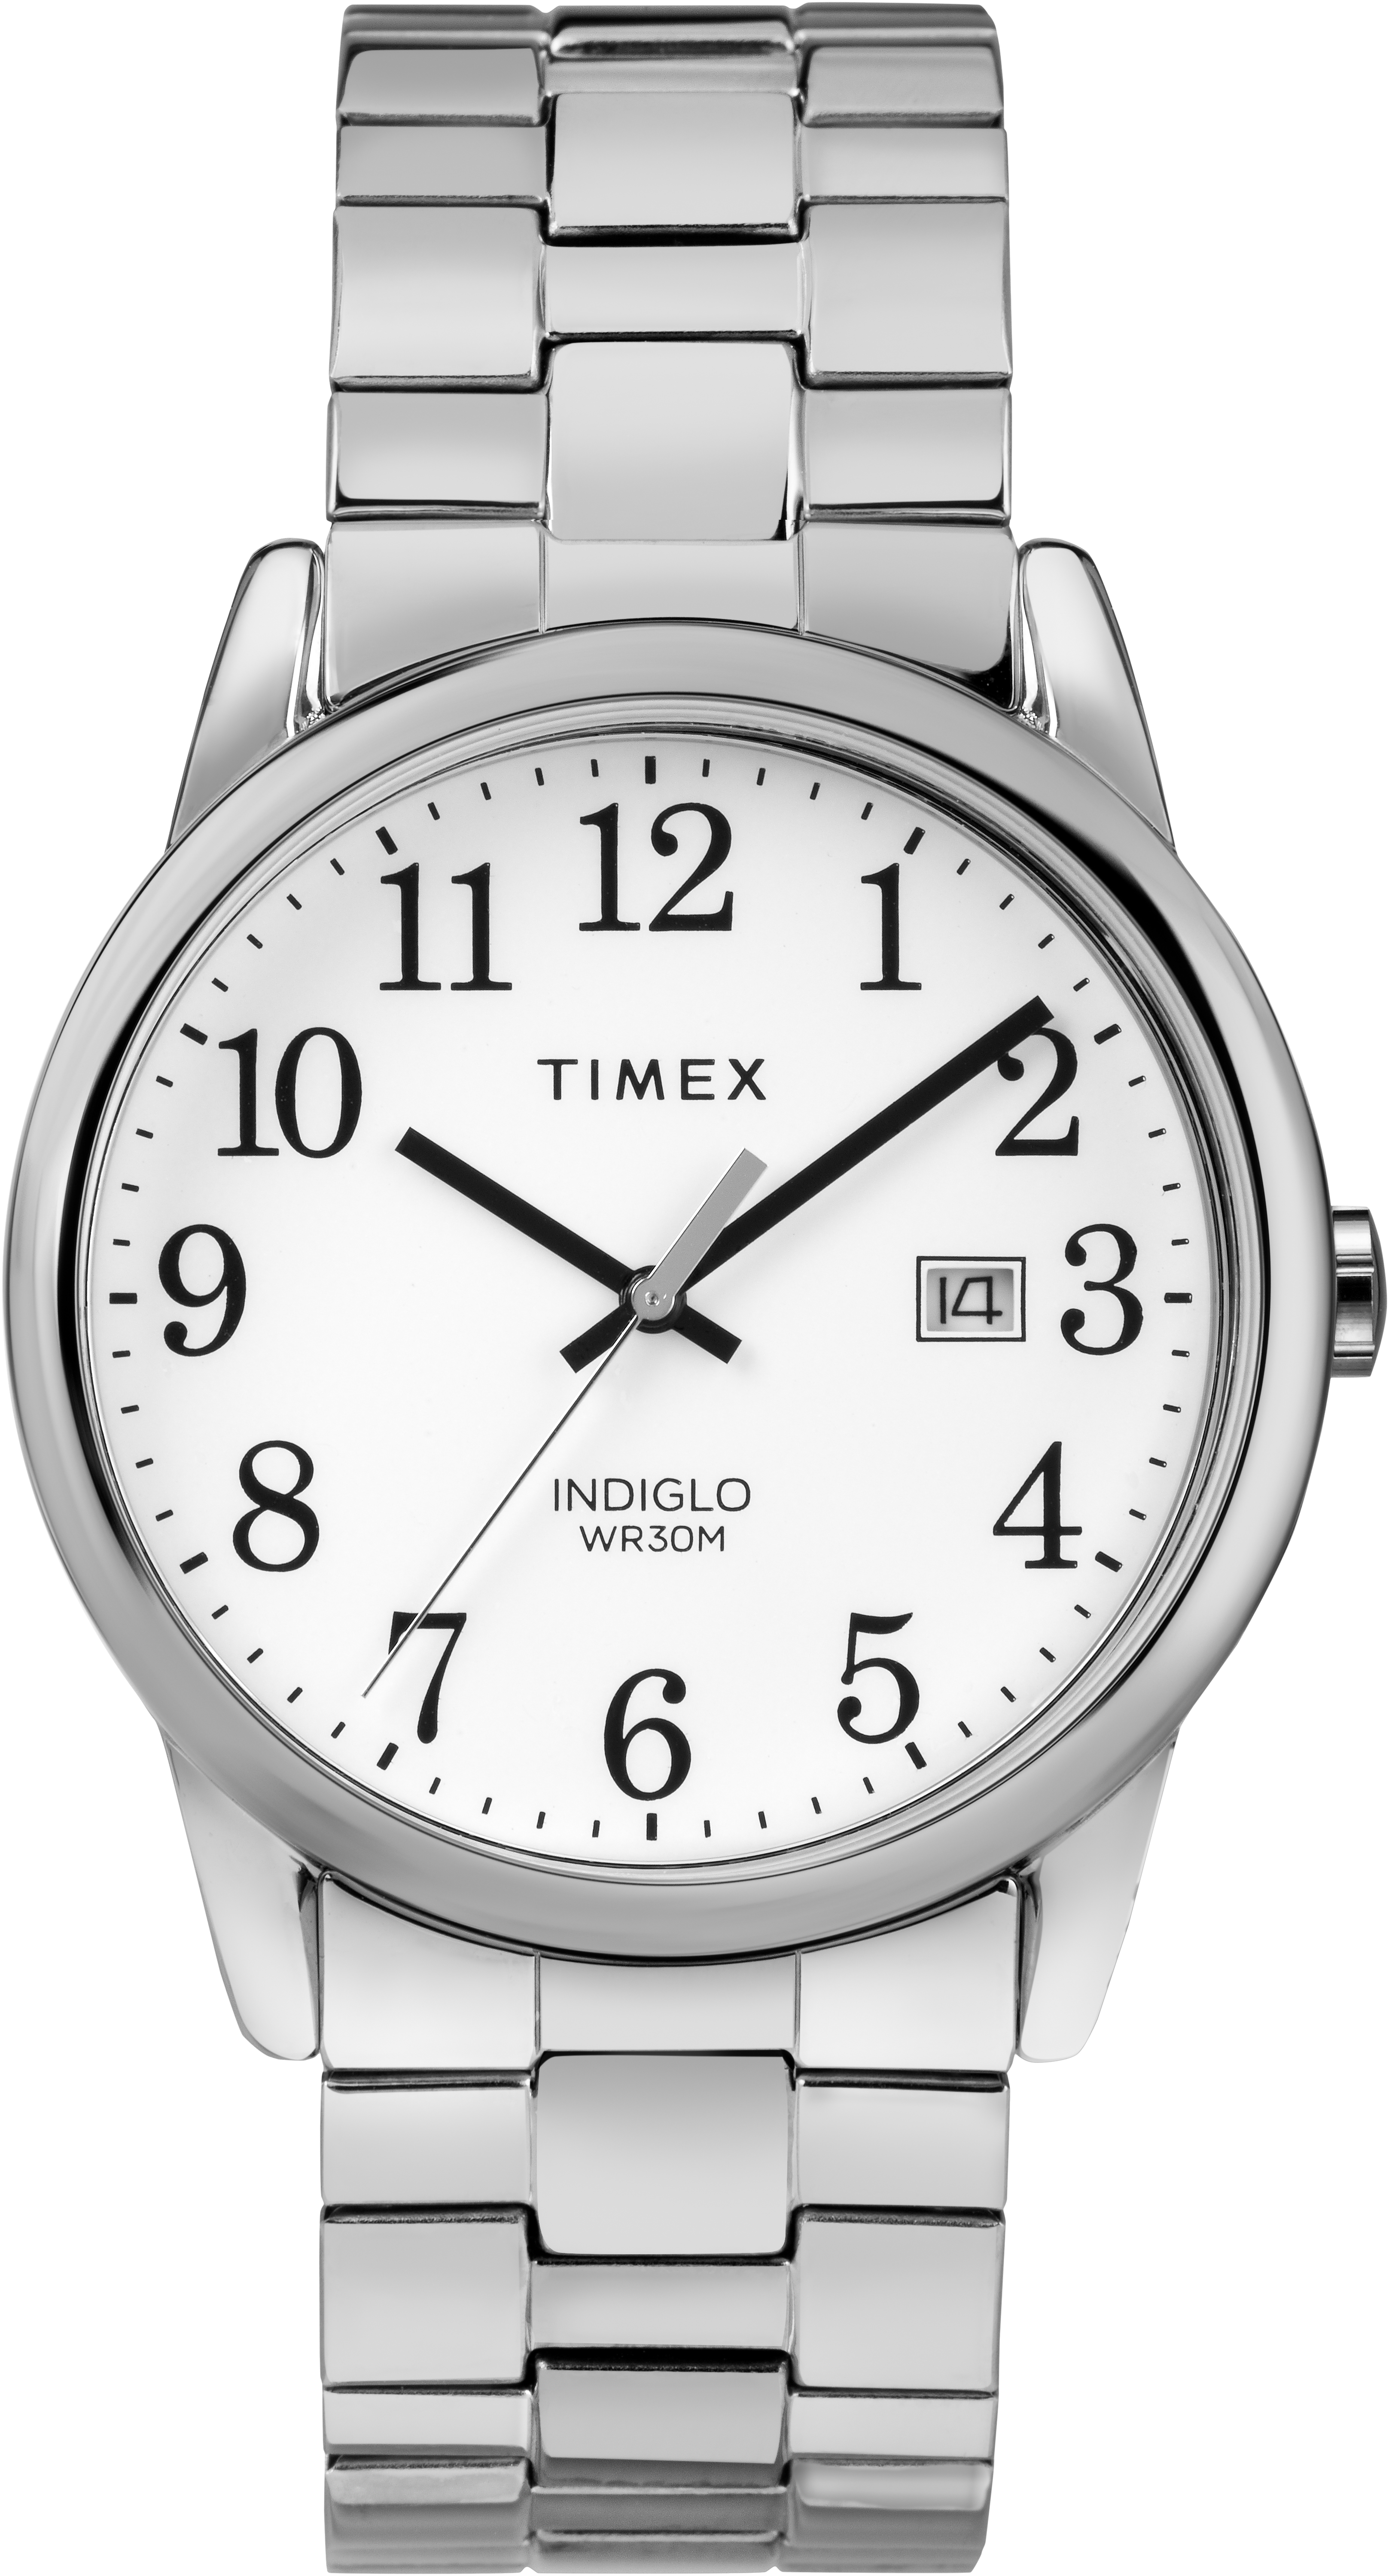 Timex Tw2r58400 Men's Stainless Expansion Bracelet Watch